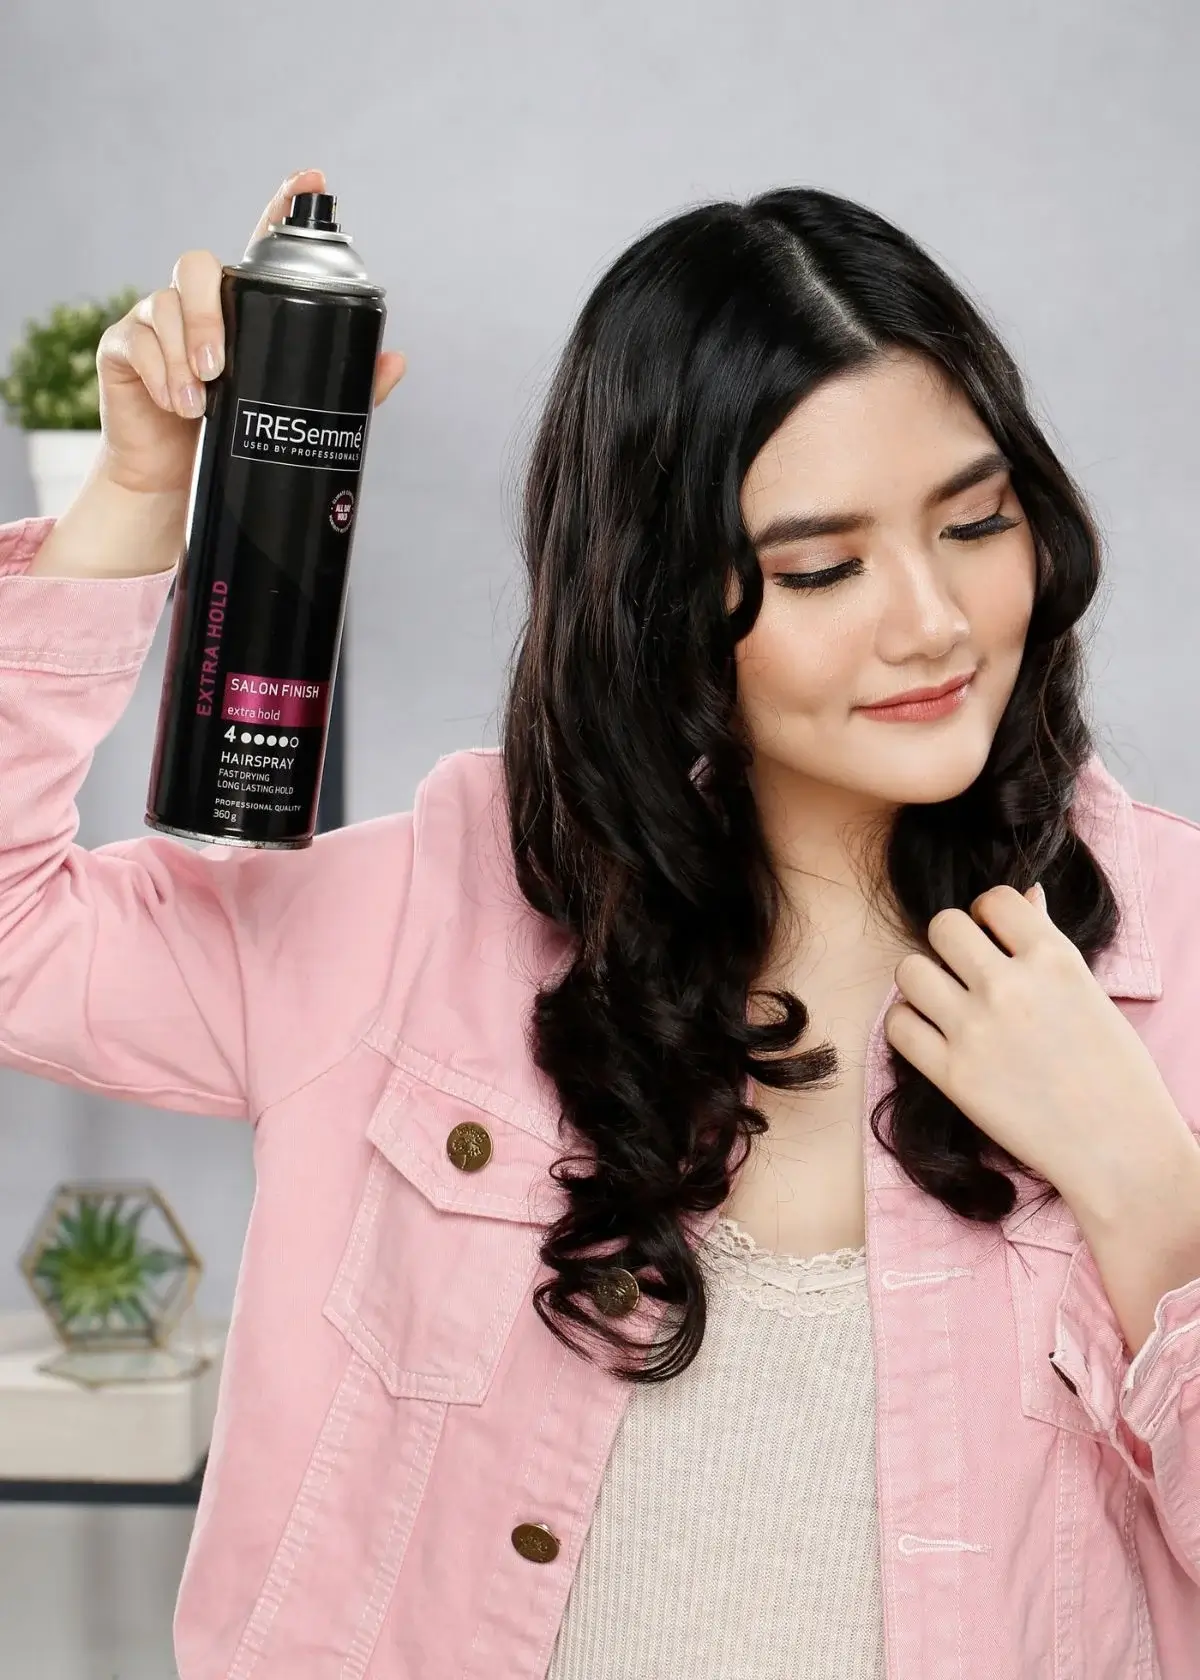 How does hair spray to hold curls work?